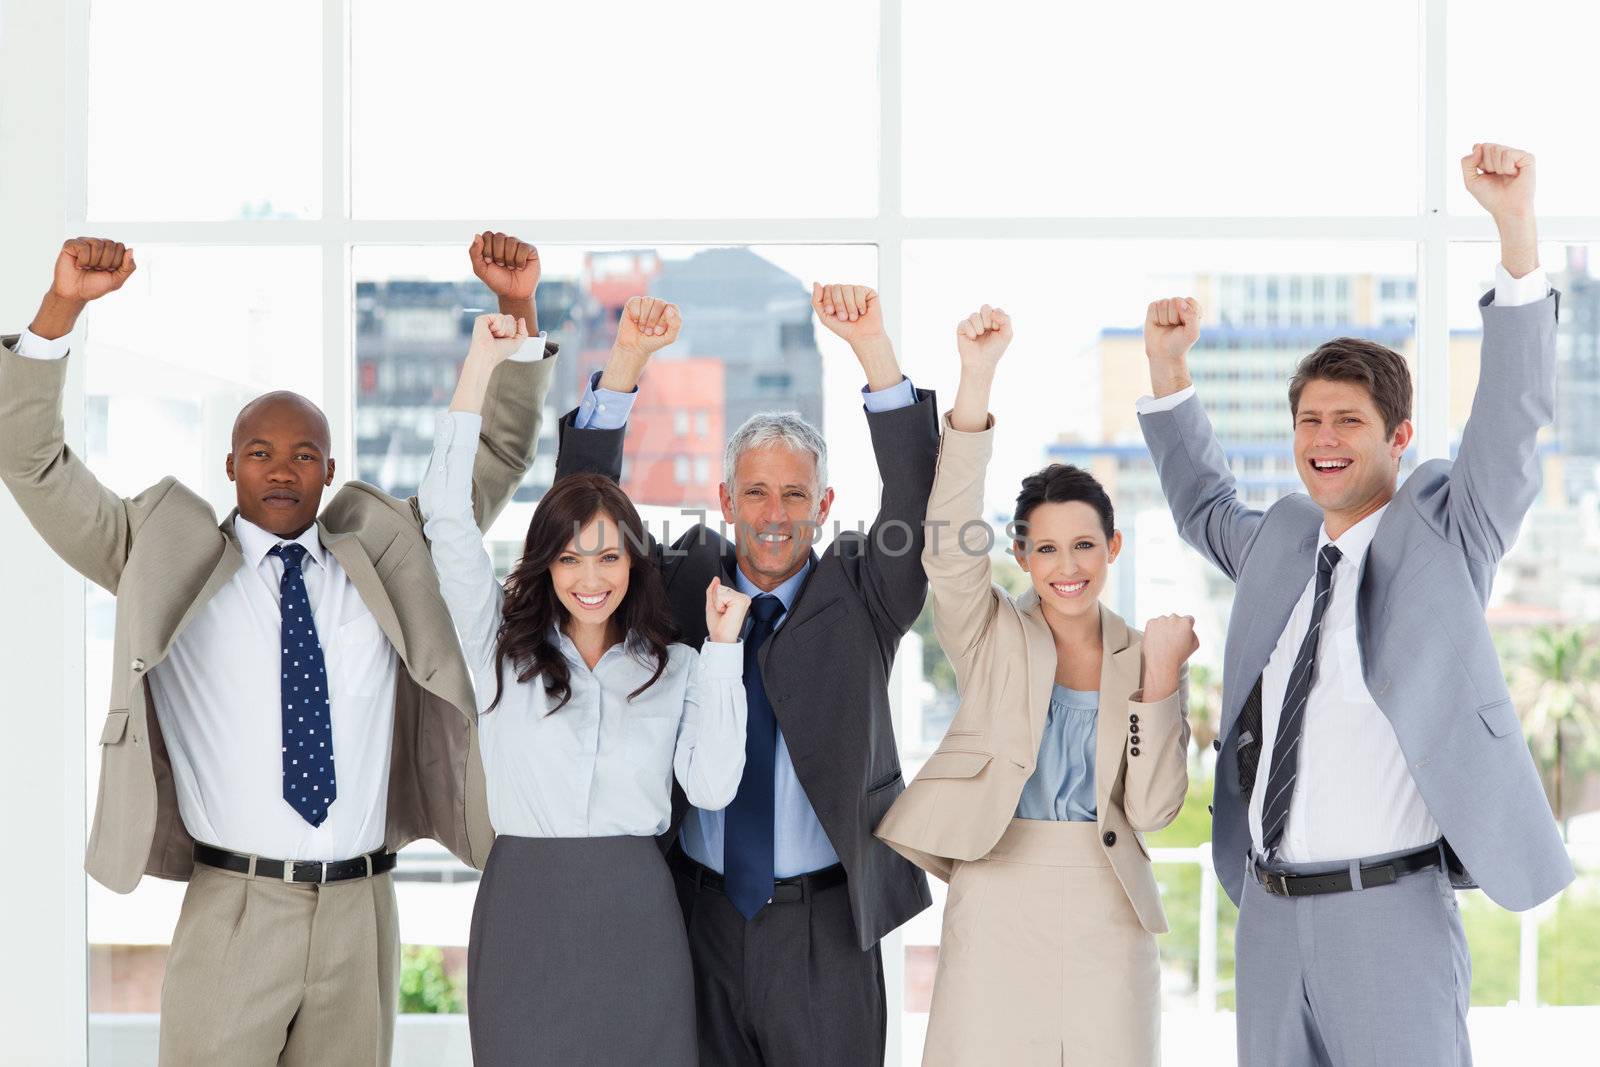 Smiling business team standing upright with arms raised in succe by Wavebreakmedia